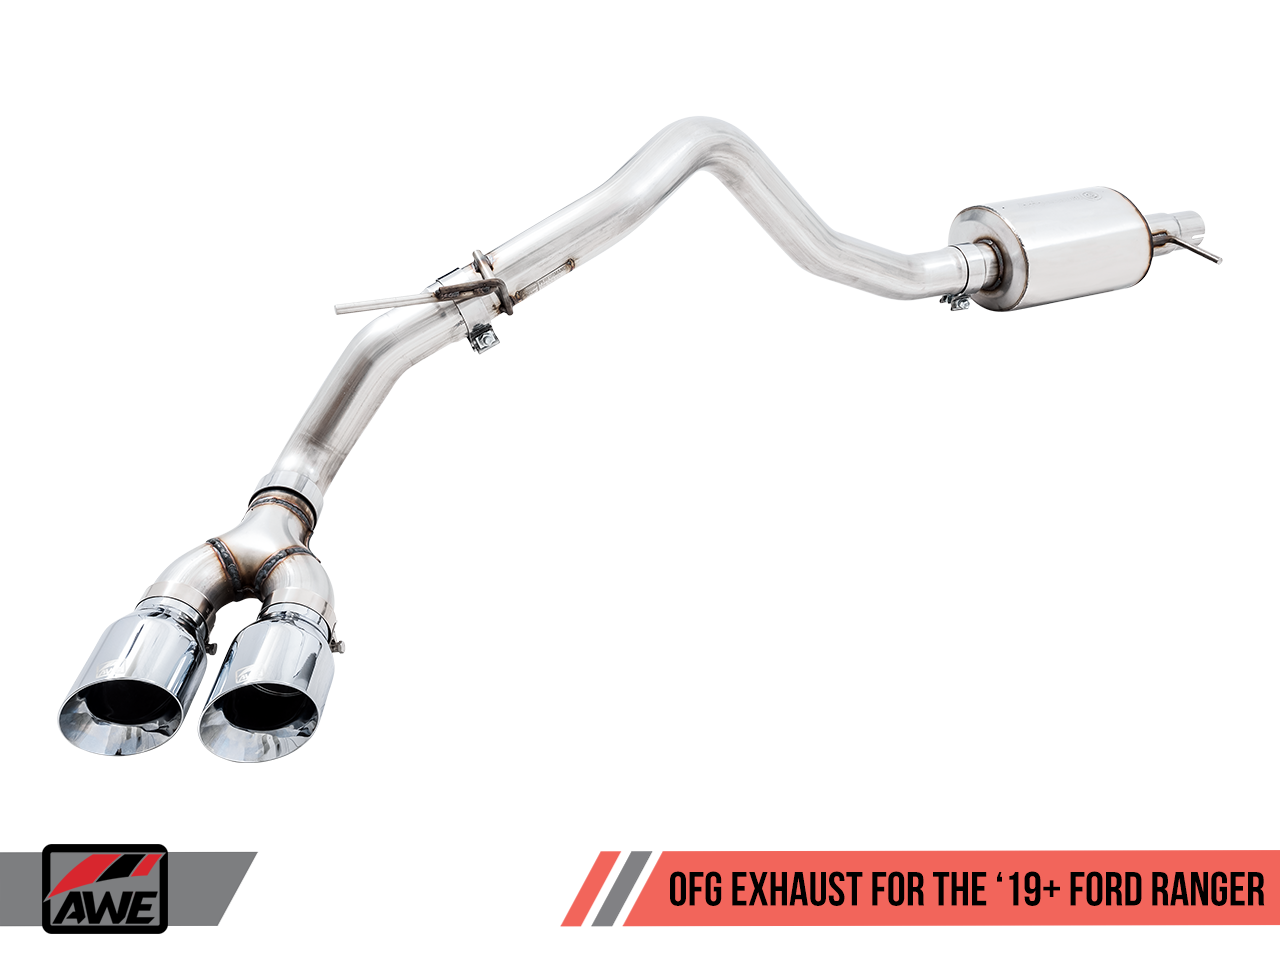 AWE Exhaust Suite for the '19+ Ford Ranger